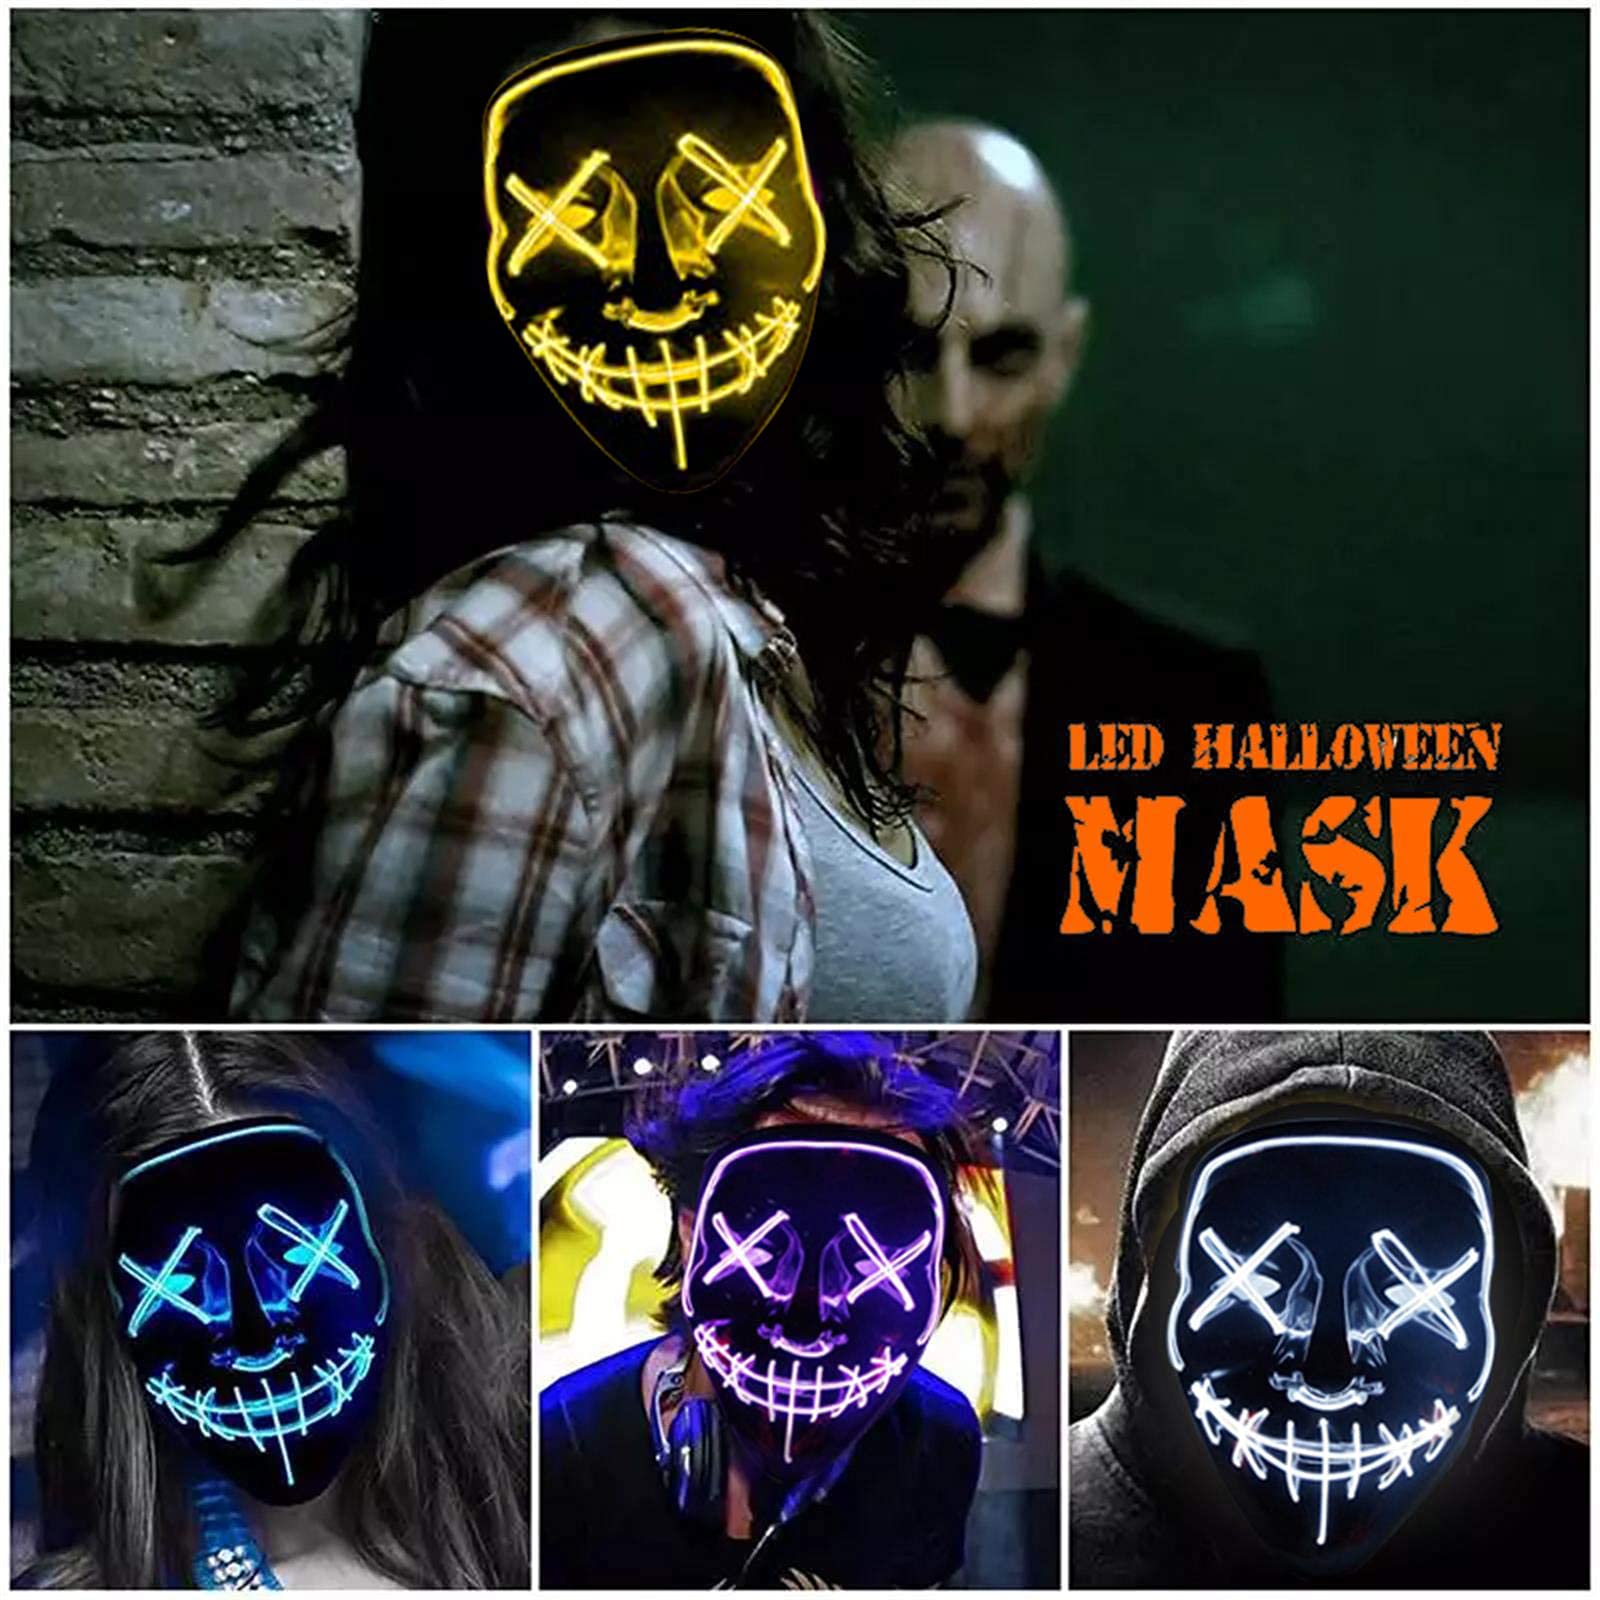 Halloween Led Light Up Mask, Purge Mask, Scary EL Wire Light up Mask Cosplay Led Costume Mask for Halloween, Festival, Party